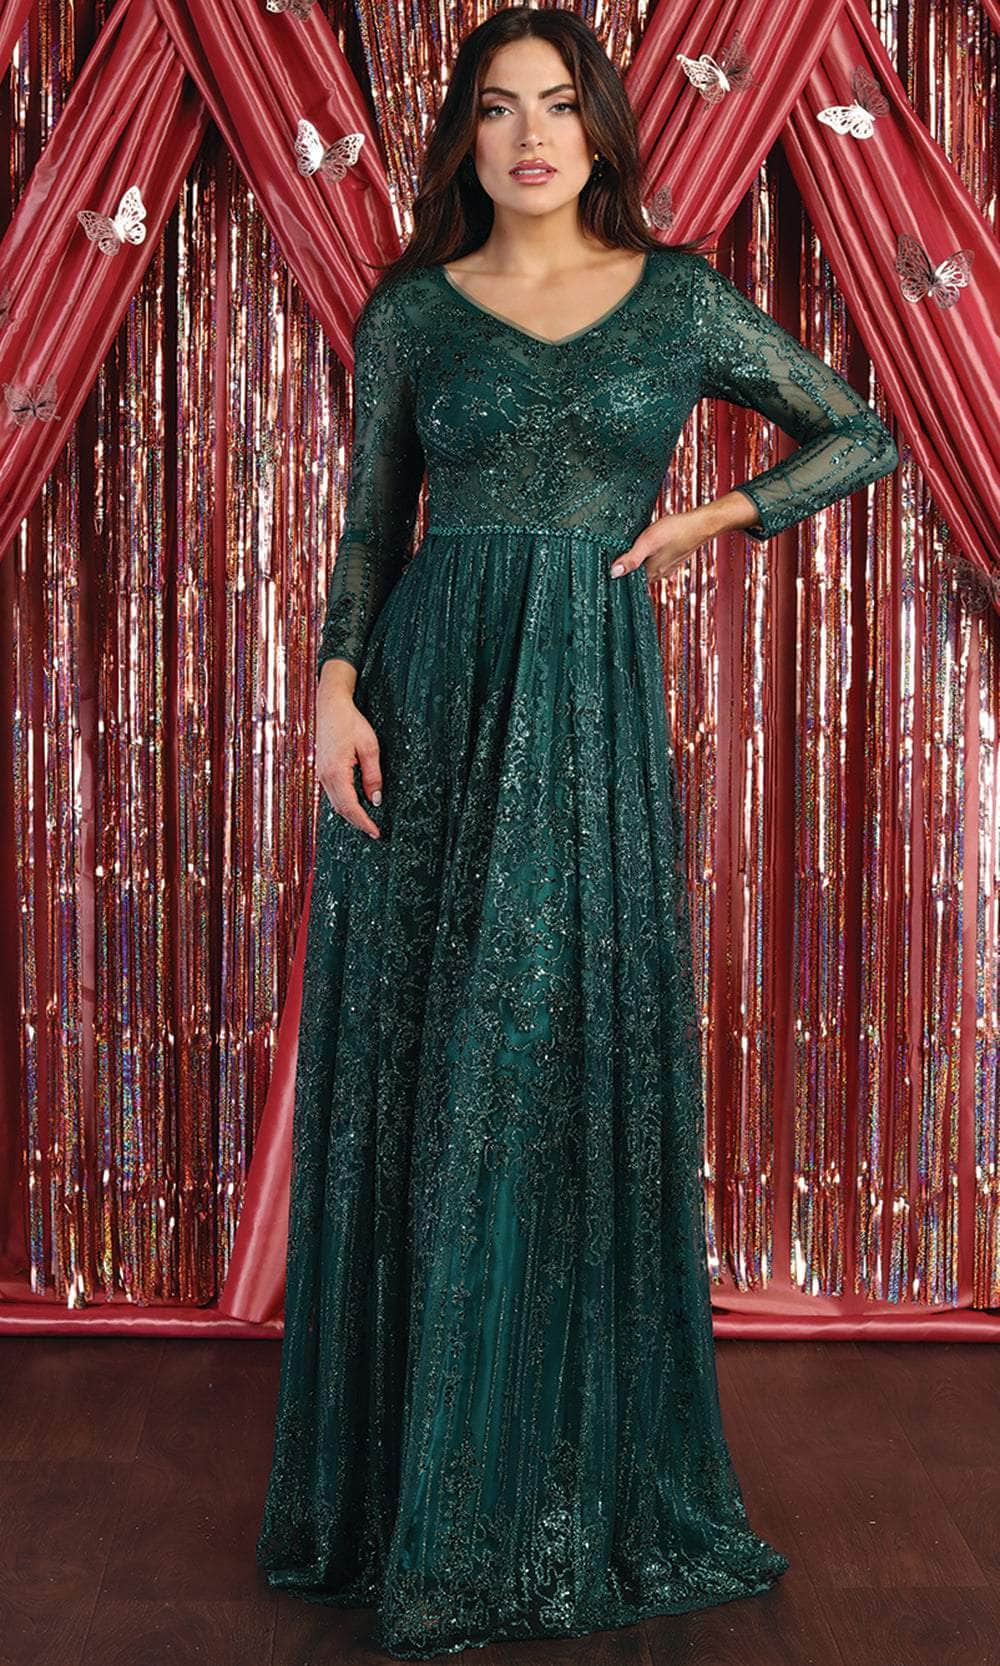 May Queen RQ7920 - Ornated Sheer Bodice Long Sleeve A Line Dress